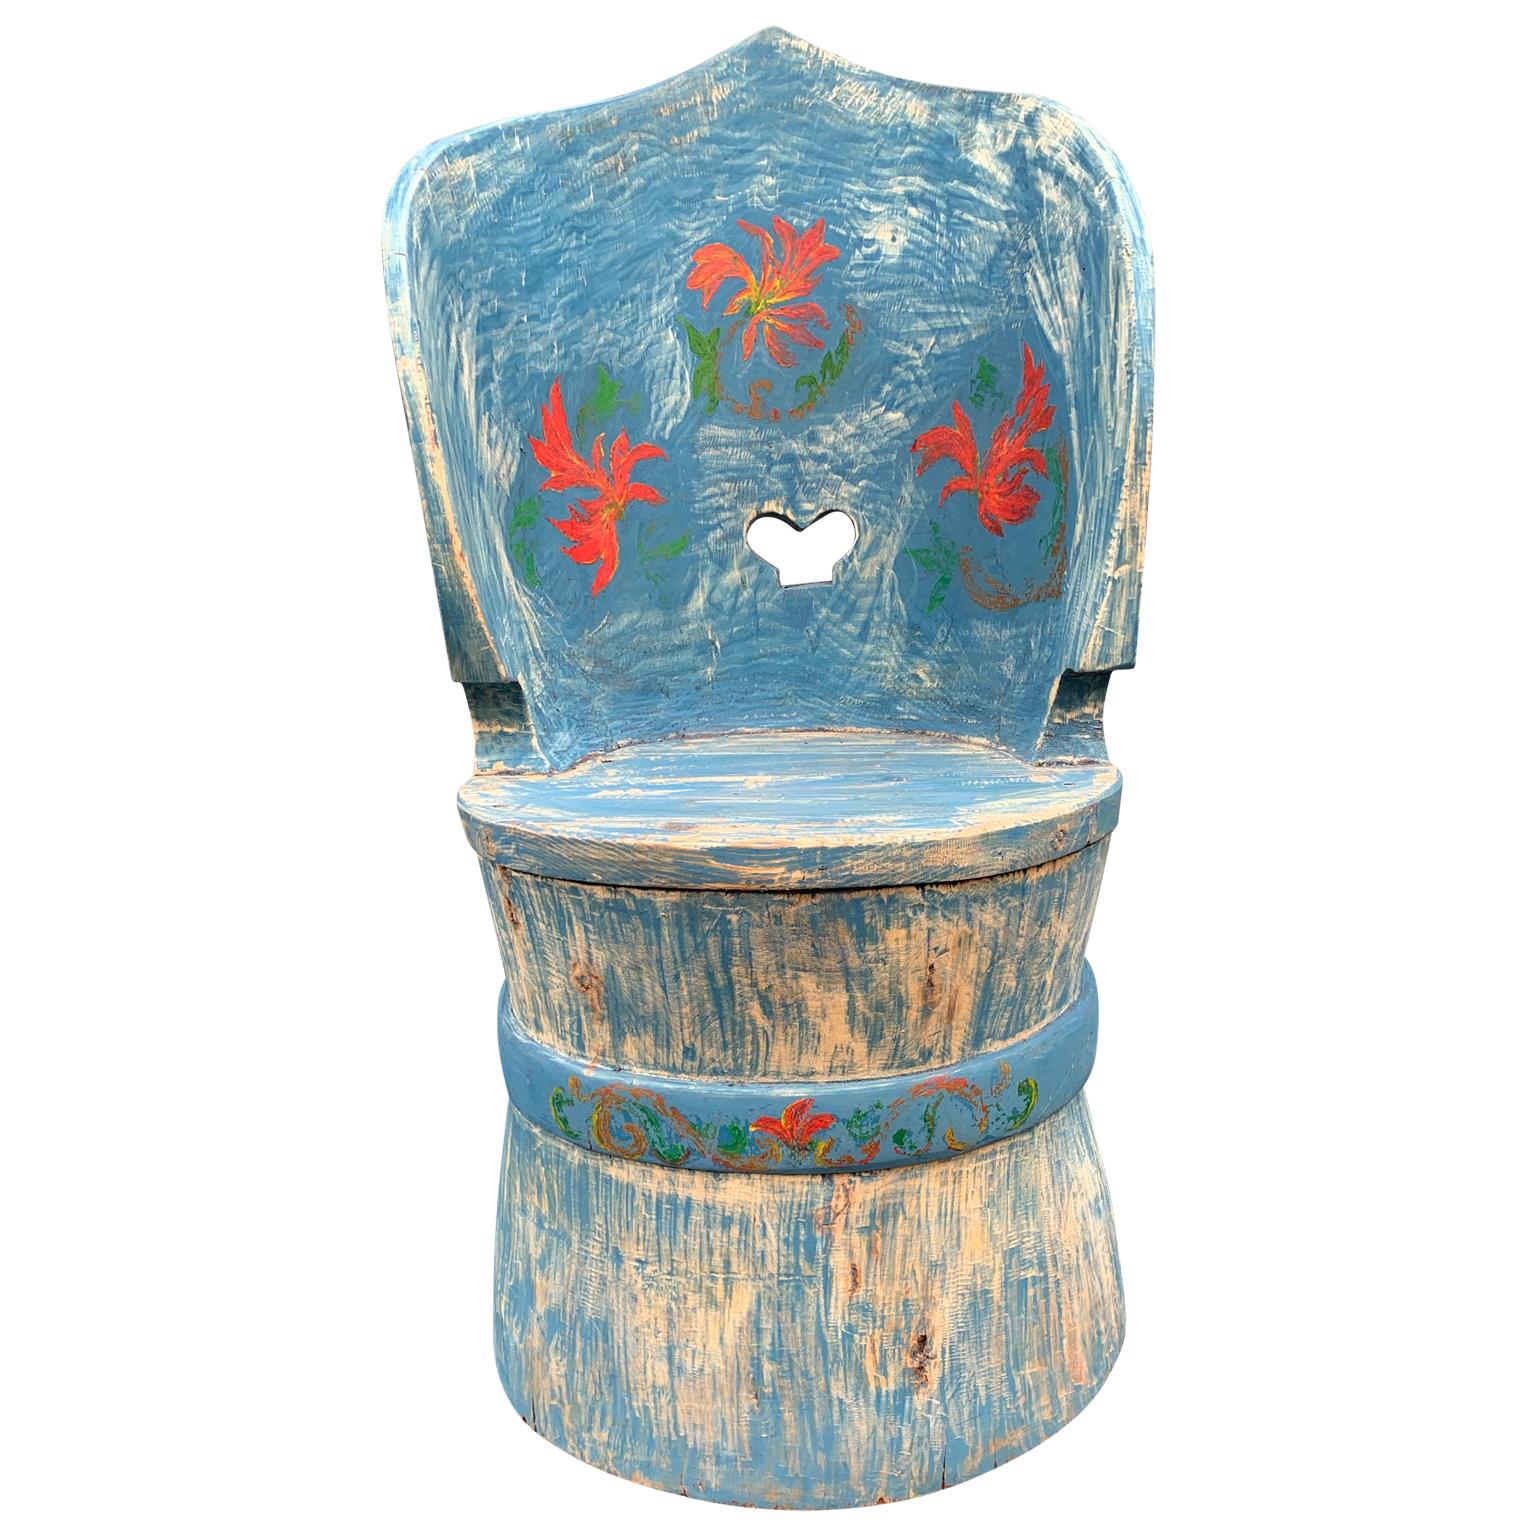 Folk Art Kubbstol chair from Northern Sweden. A Kubbstol chair is made from a hollowed tree trunk; from a single piece of wood that's been hewn out to form the seat, back and frame. It's construction is rustic with a simple design. This particular